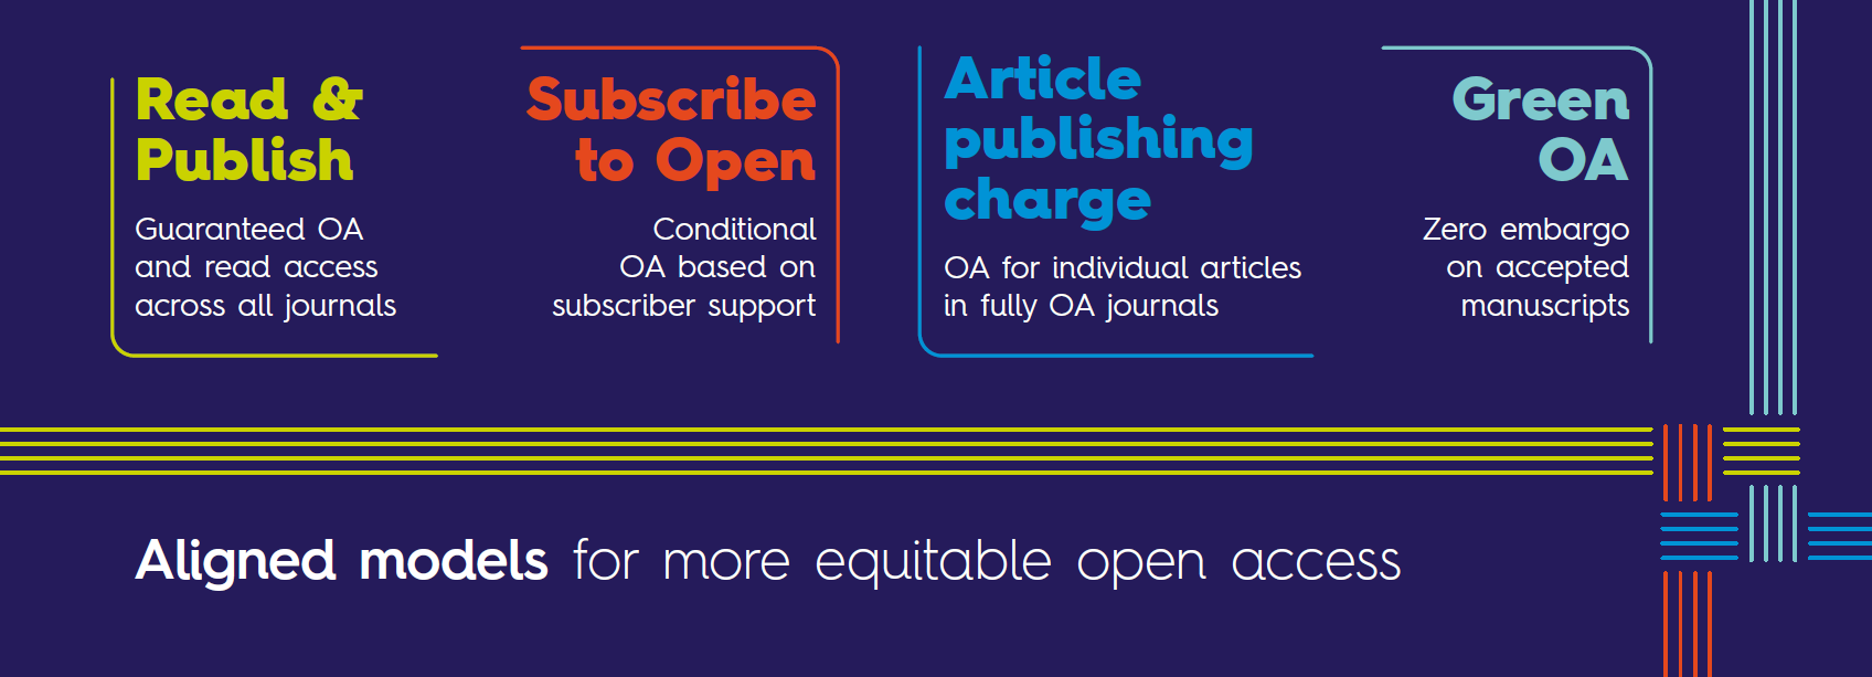 Read & Publish, Subscribe to Open, Article publishing charge, Green OA